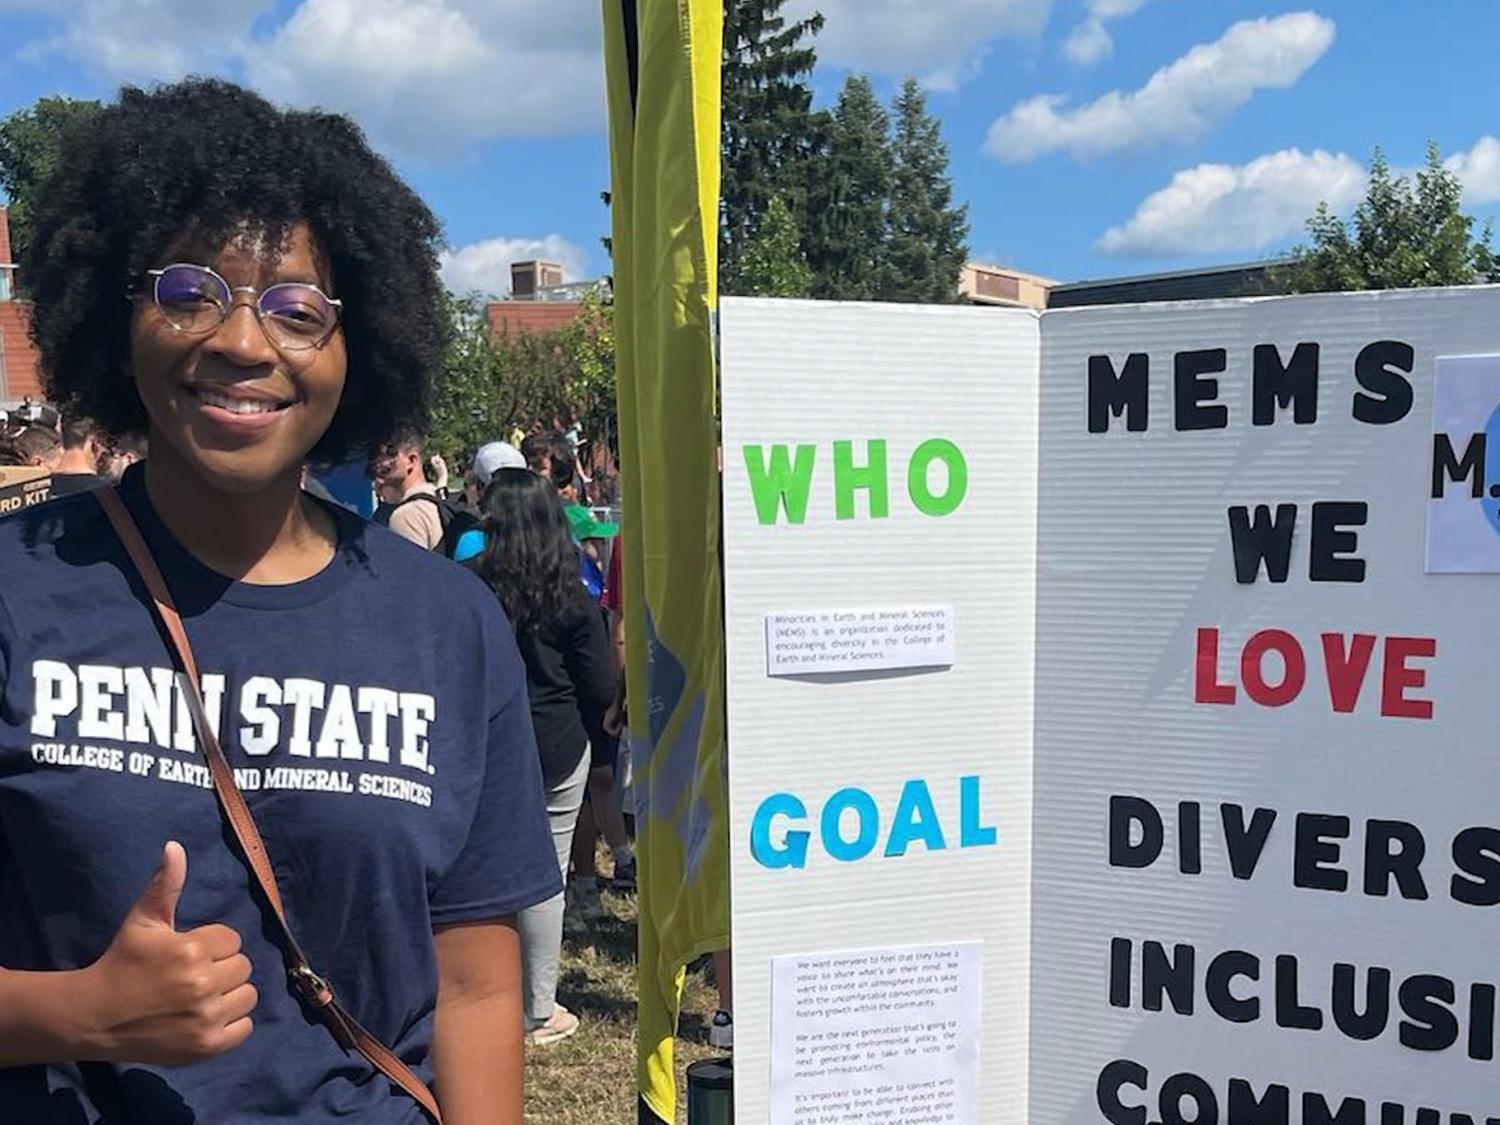 Khaleah Jackson, a Penn State senior majoring in environmental systems engineering and president of Minorities in Earth and Mineral Sciences.